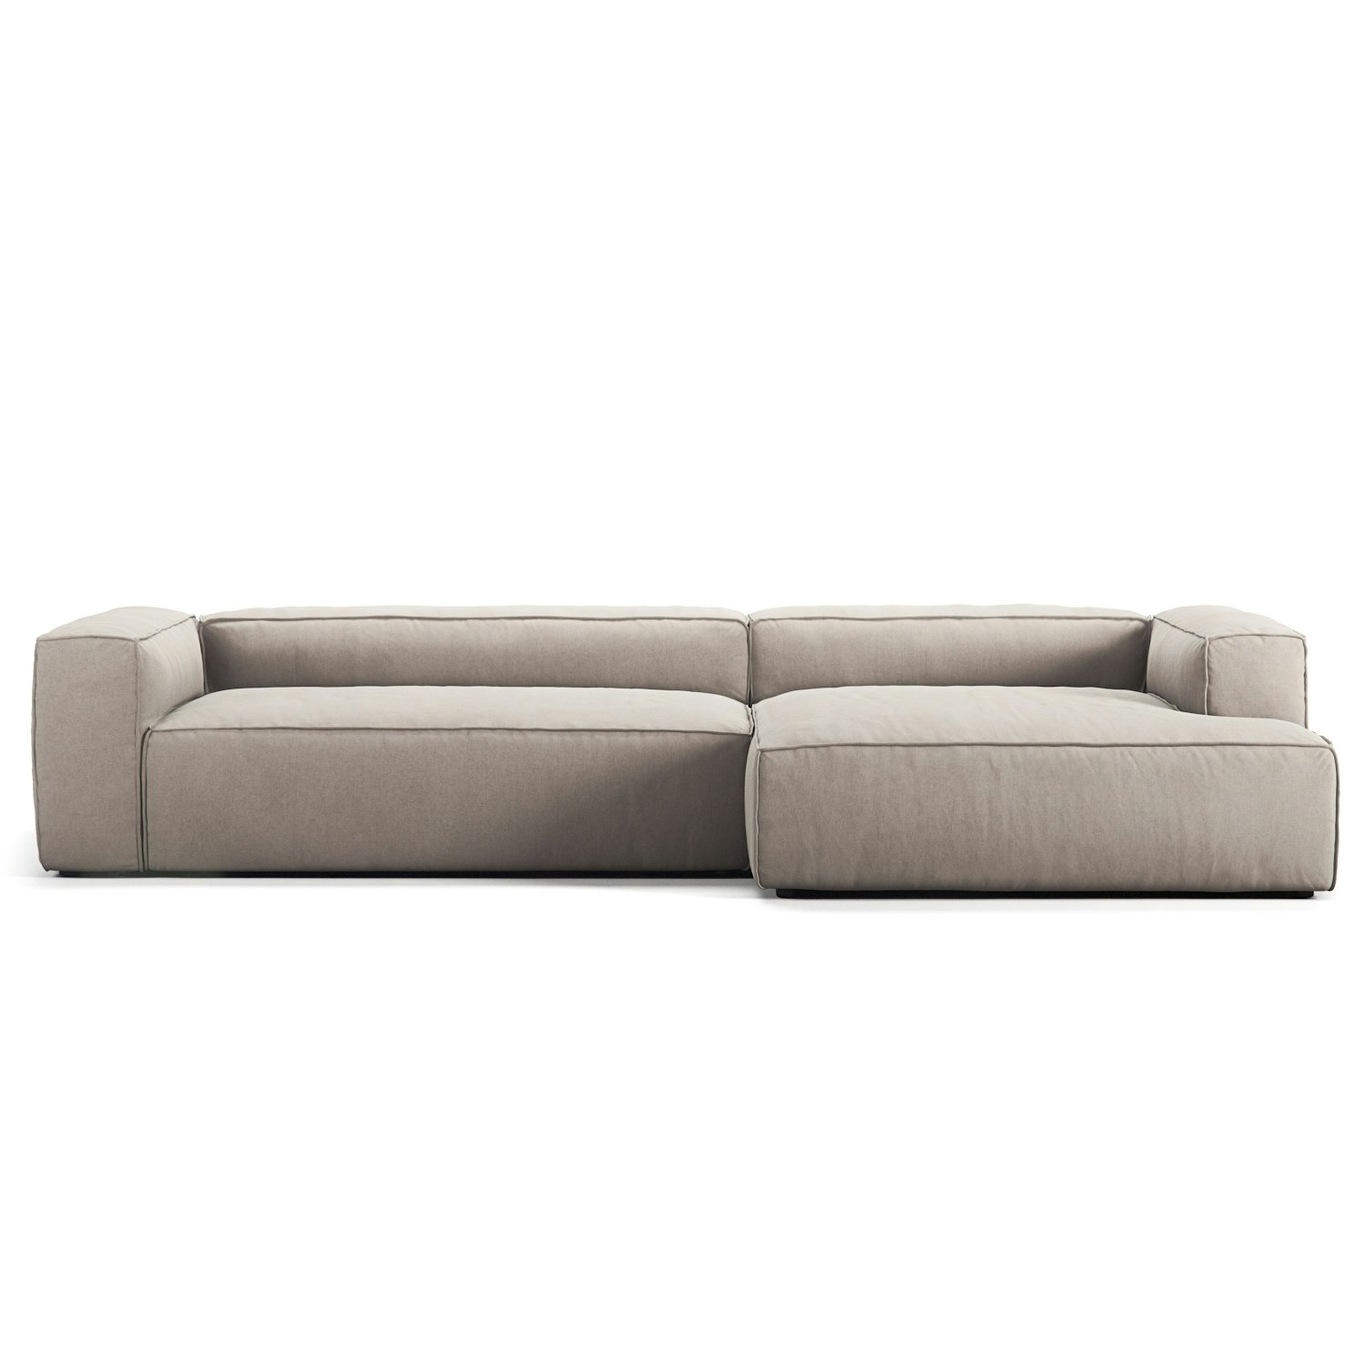 Grand 4 Seater Sofa chaise Longue Right, Sandshell Beige